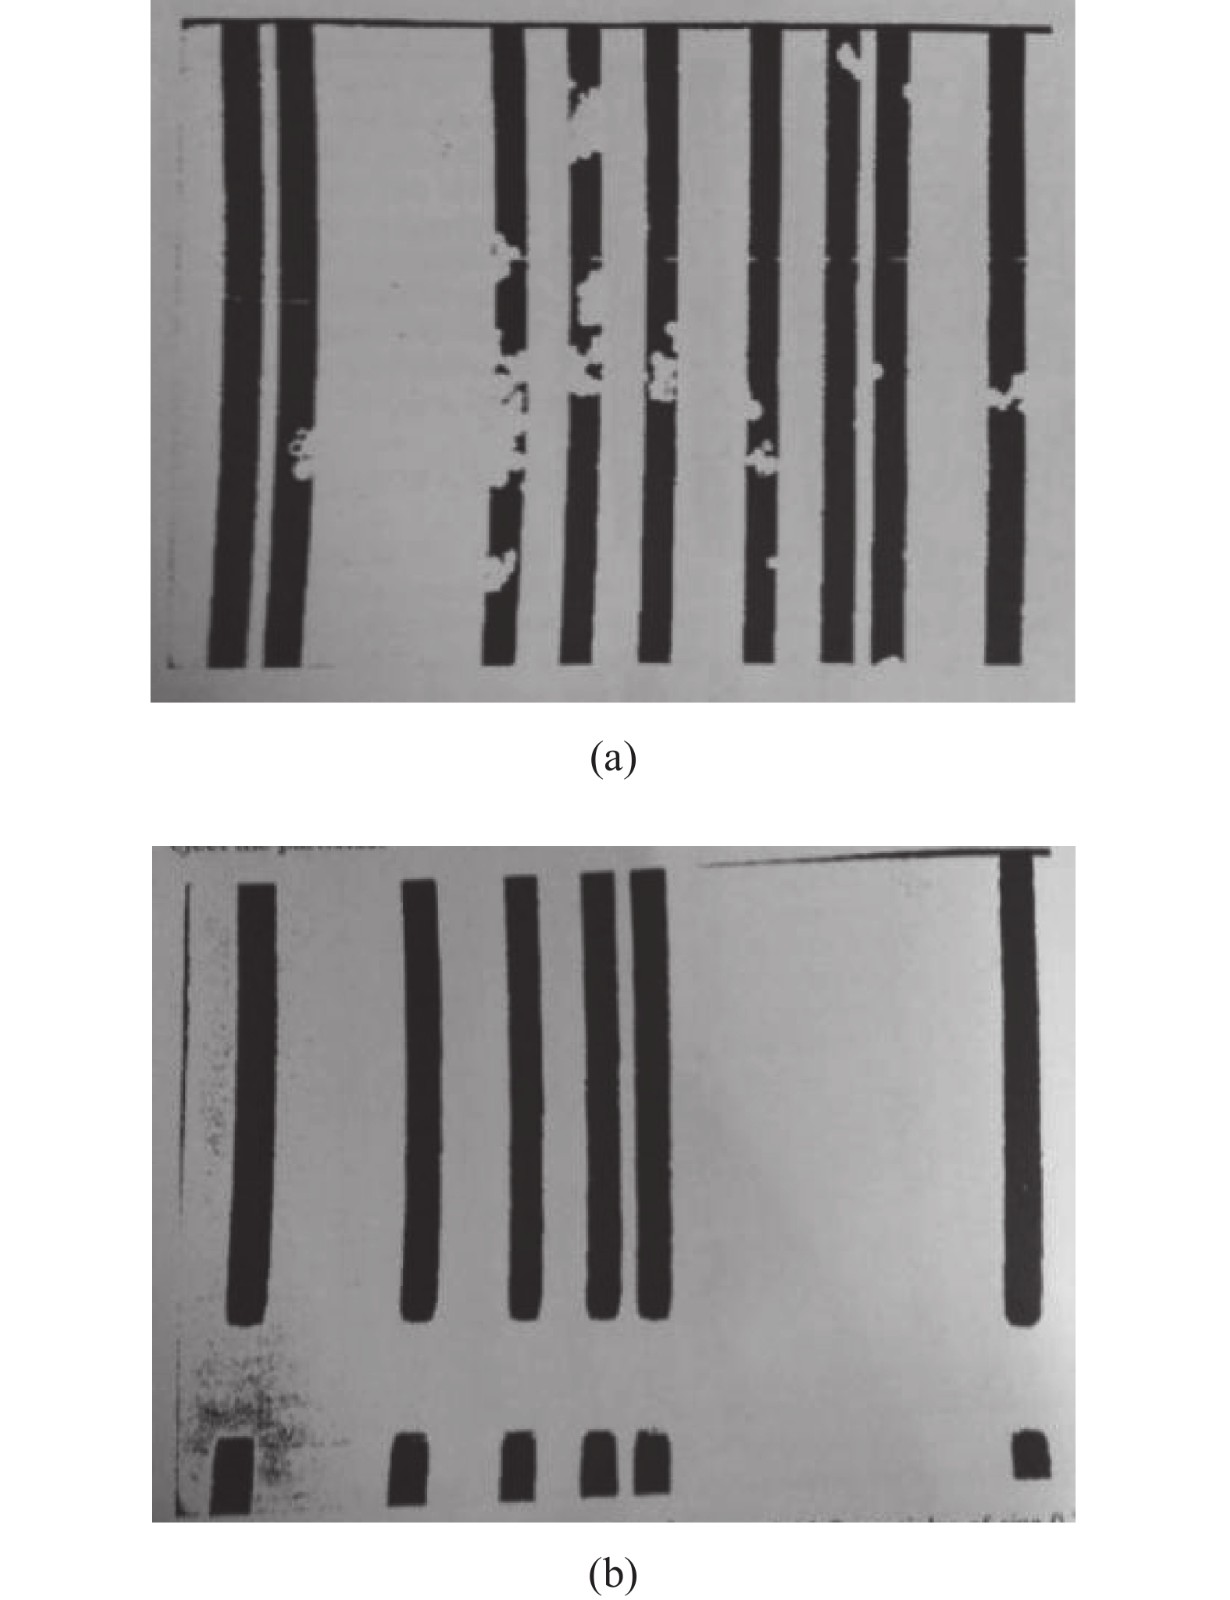 (a) A silicon mask with Al2O3 spherical pollution particles atta-ched; (b) Photo after KrF laser cleaning